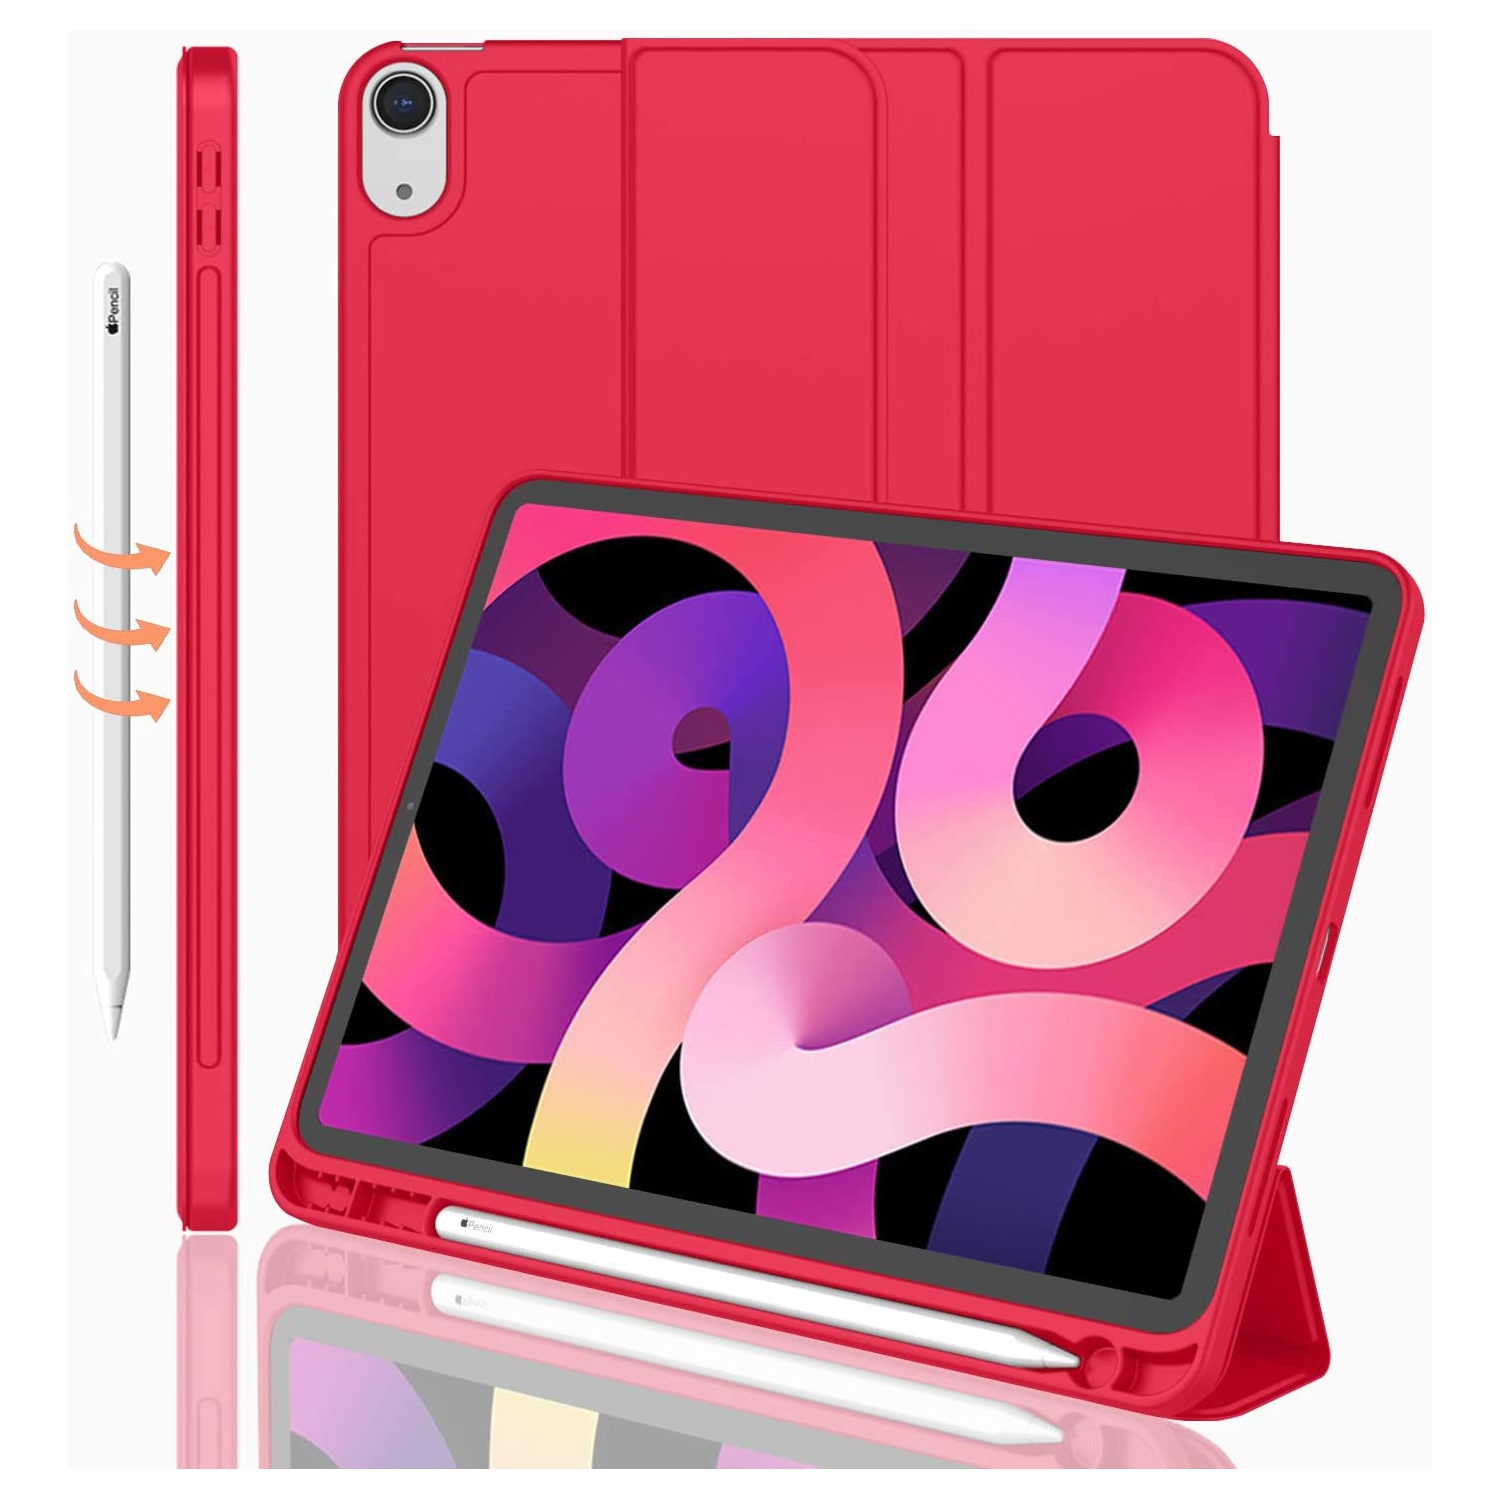 Slim Magnetic Smart Cover Stand Case with Auto Sleep/Wake & Pencil Holder for iPad Air 4 5 4th 5th Gen. 10.9", Red